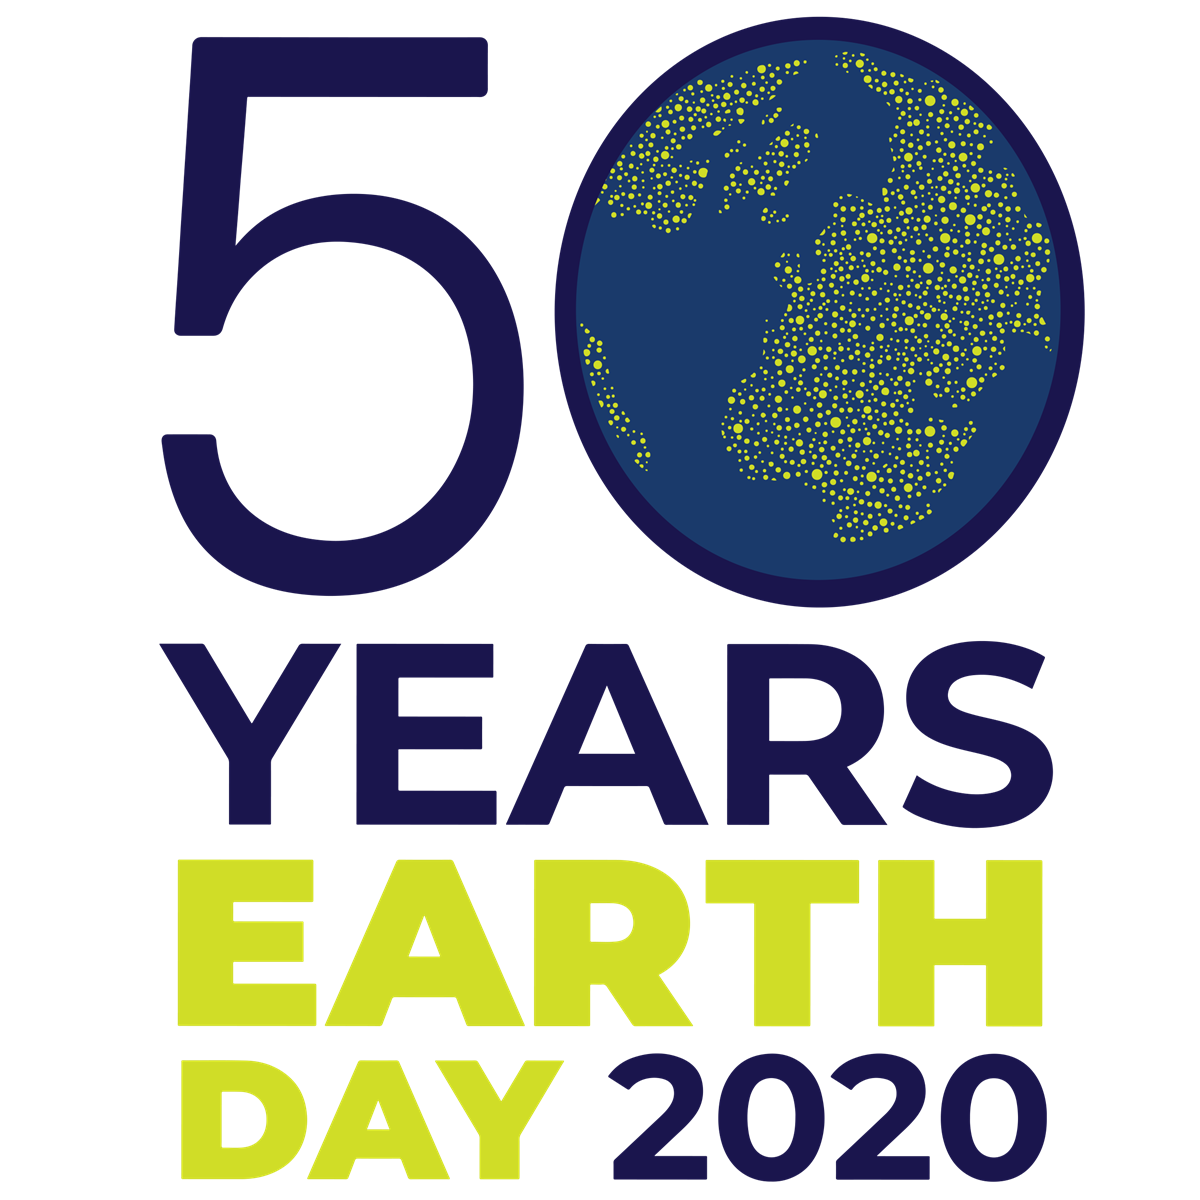 Logo with text: 50 Years Earth Day 2020. Inside the 0 in 50 is an image of the earth with the zero as the outline for the planet.